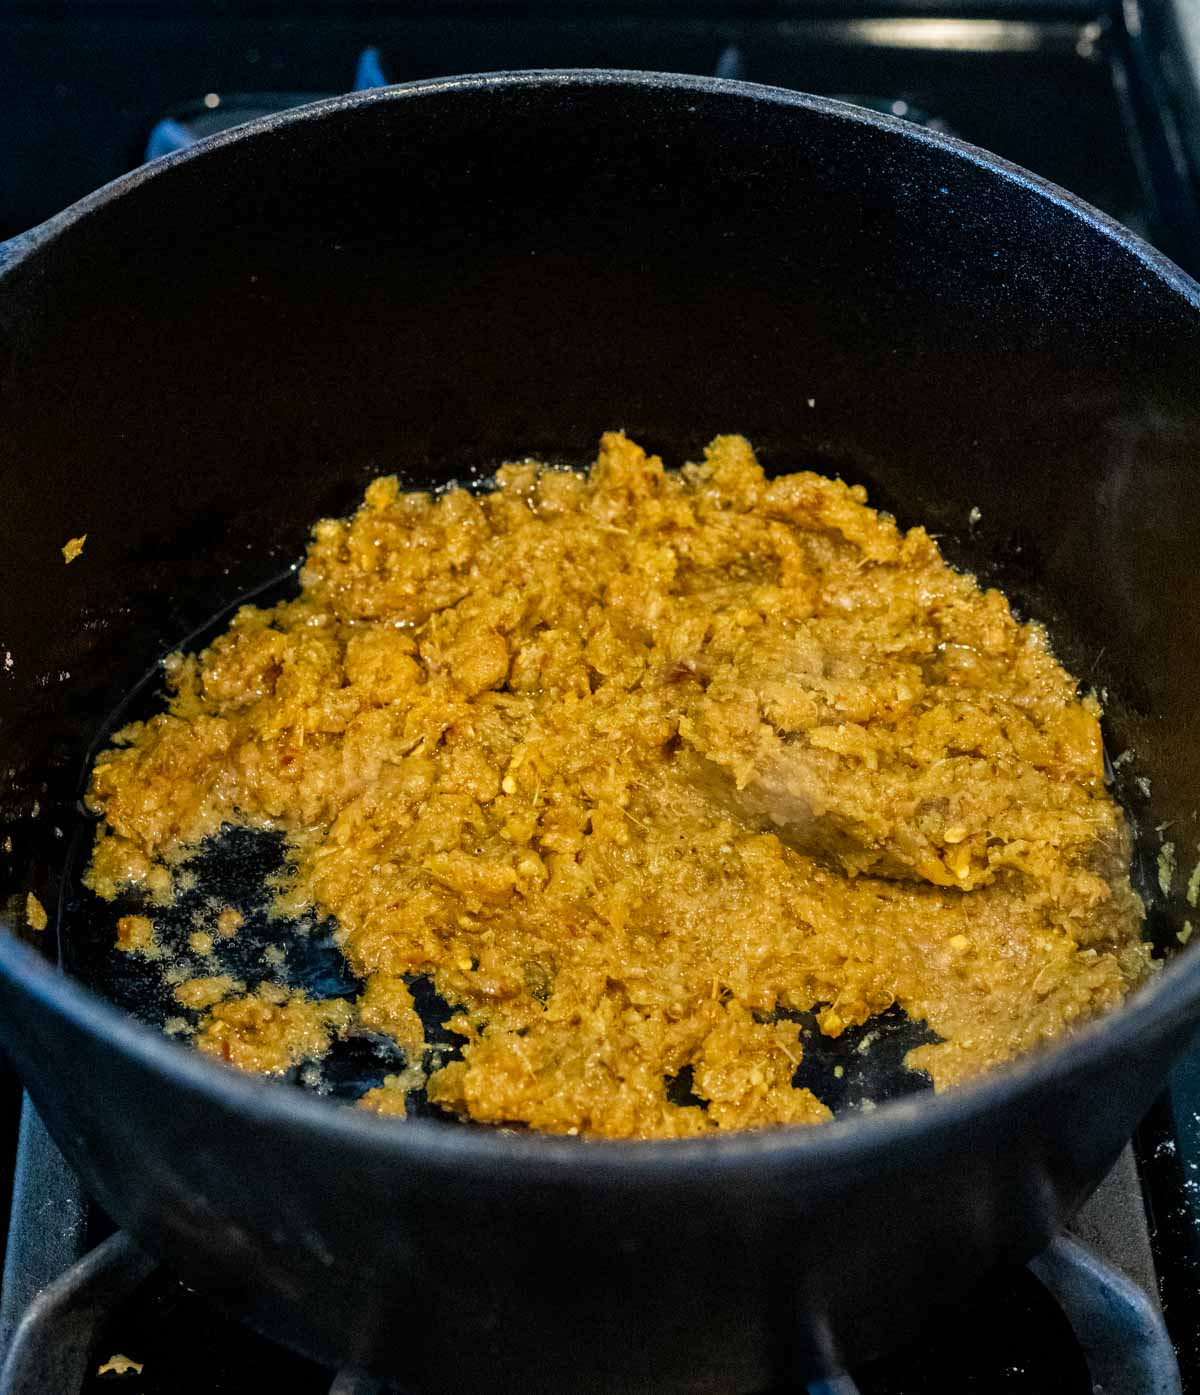 Spice paste cooking in a Dutch oven on the stovetop.